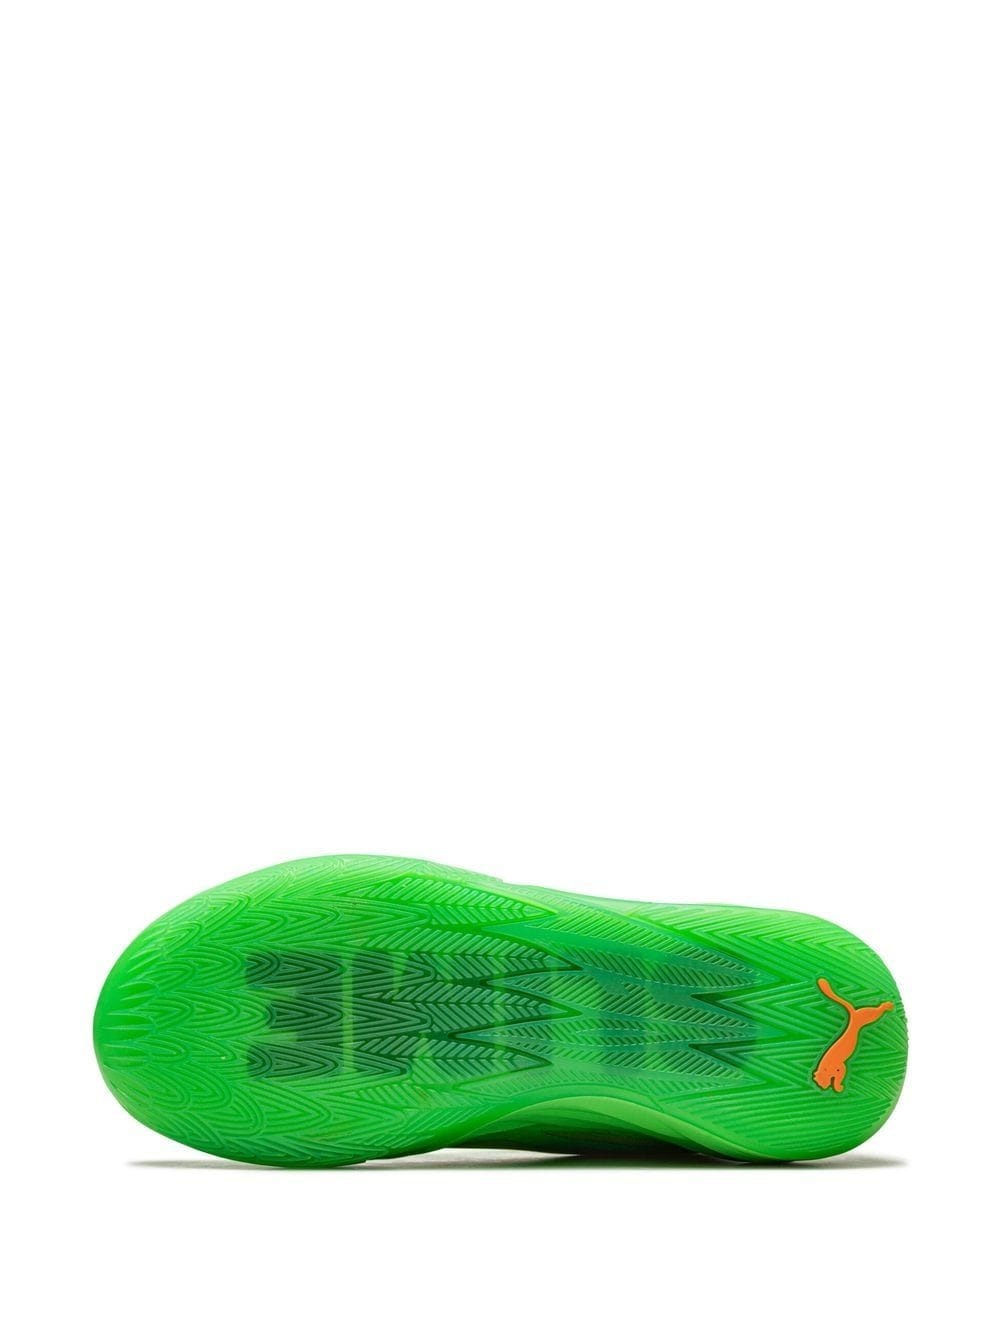 LaMelo Ball MB.02 "Nickelodeon Slime" sneakers - 6